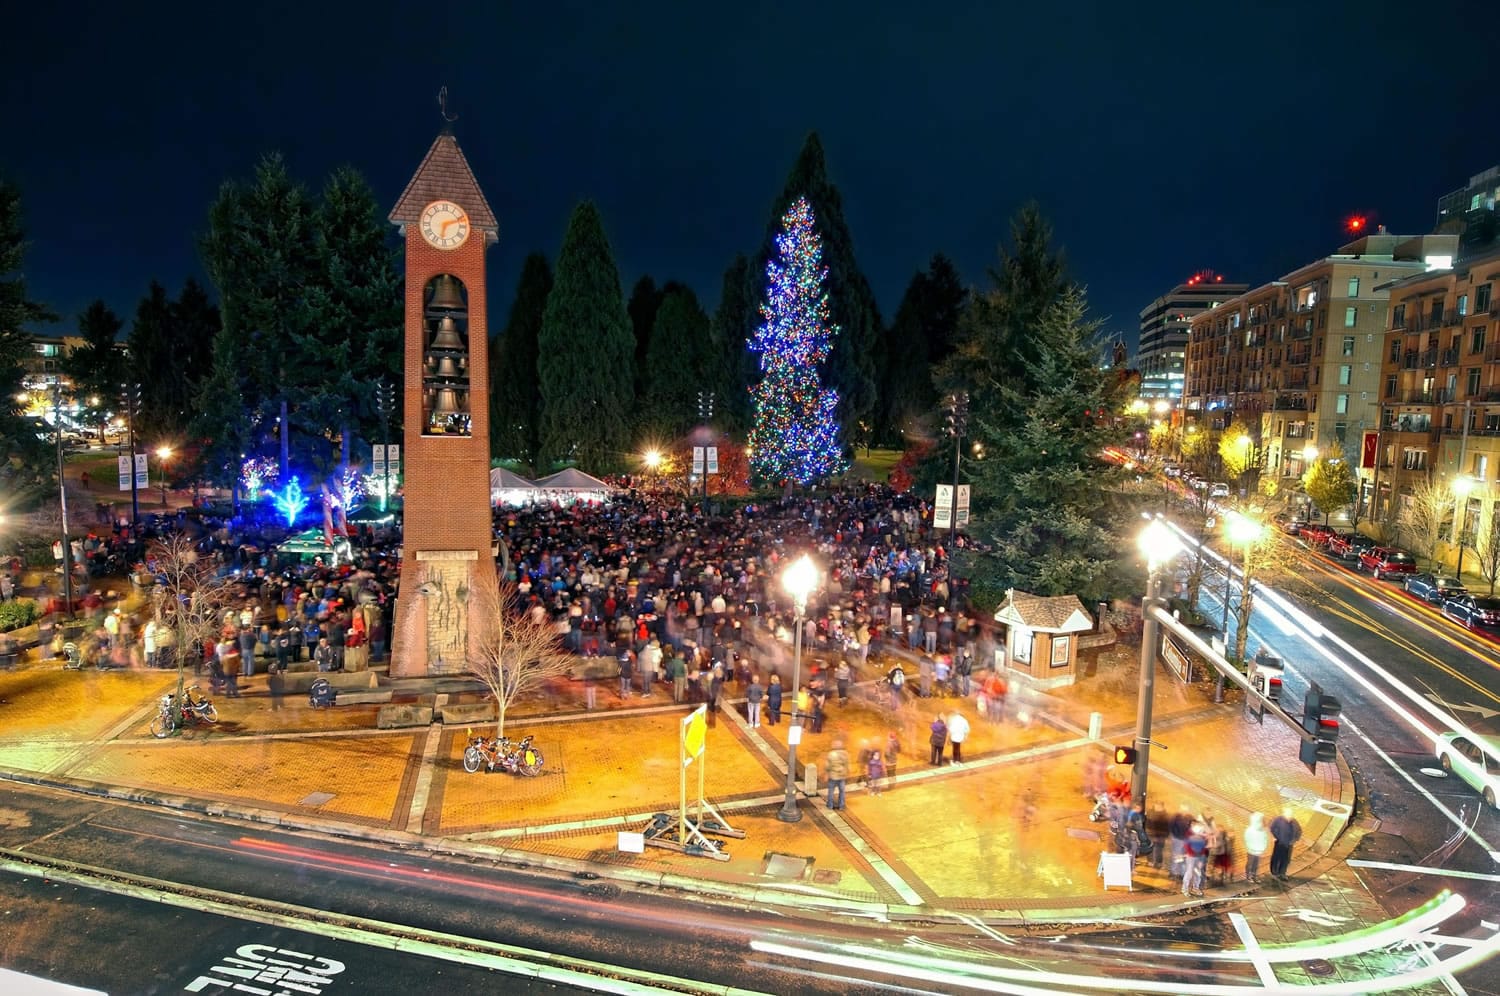 Revelers gather in Esther Short Park early Friday evening after the annual lighting of the park's Christmas tree.